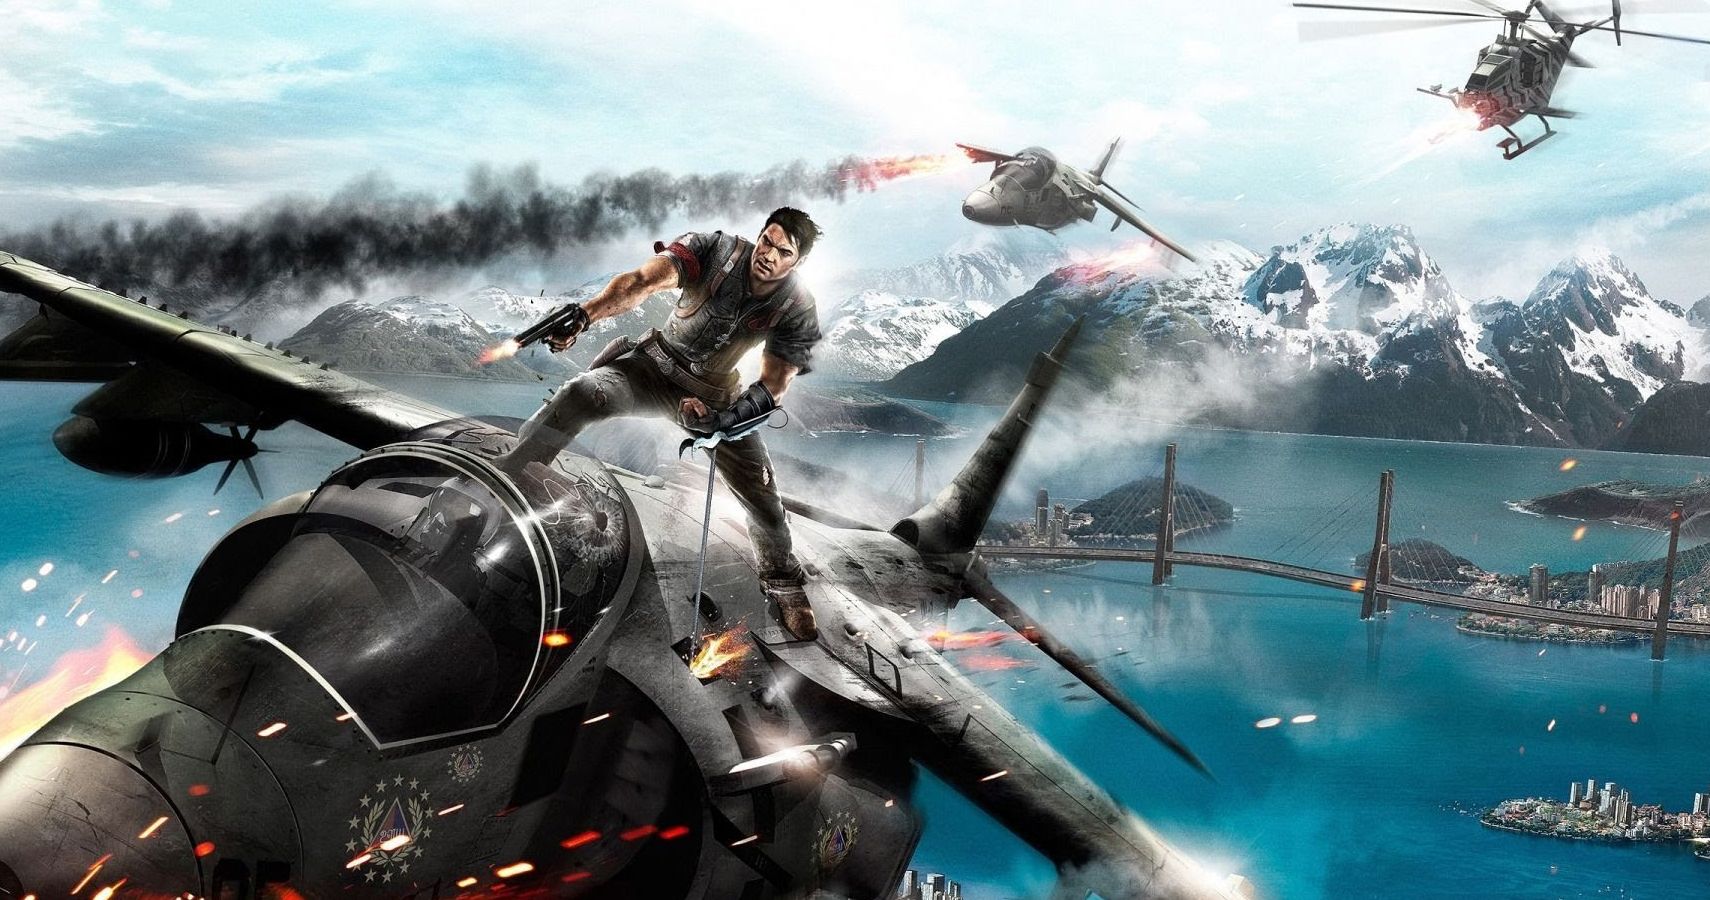 Just Cause 2 protagonist riding a plane above an ocean